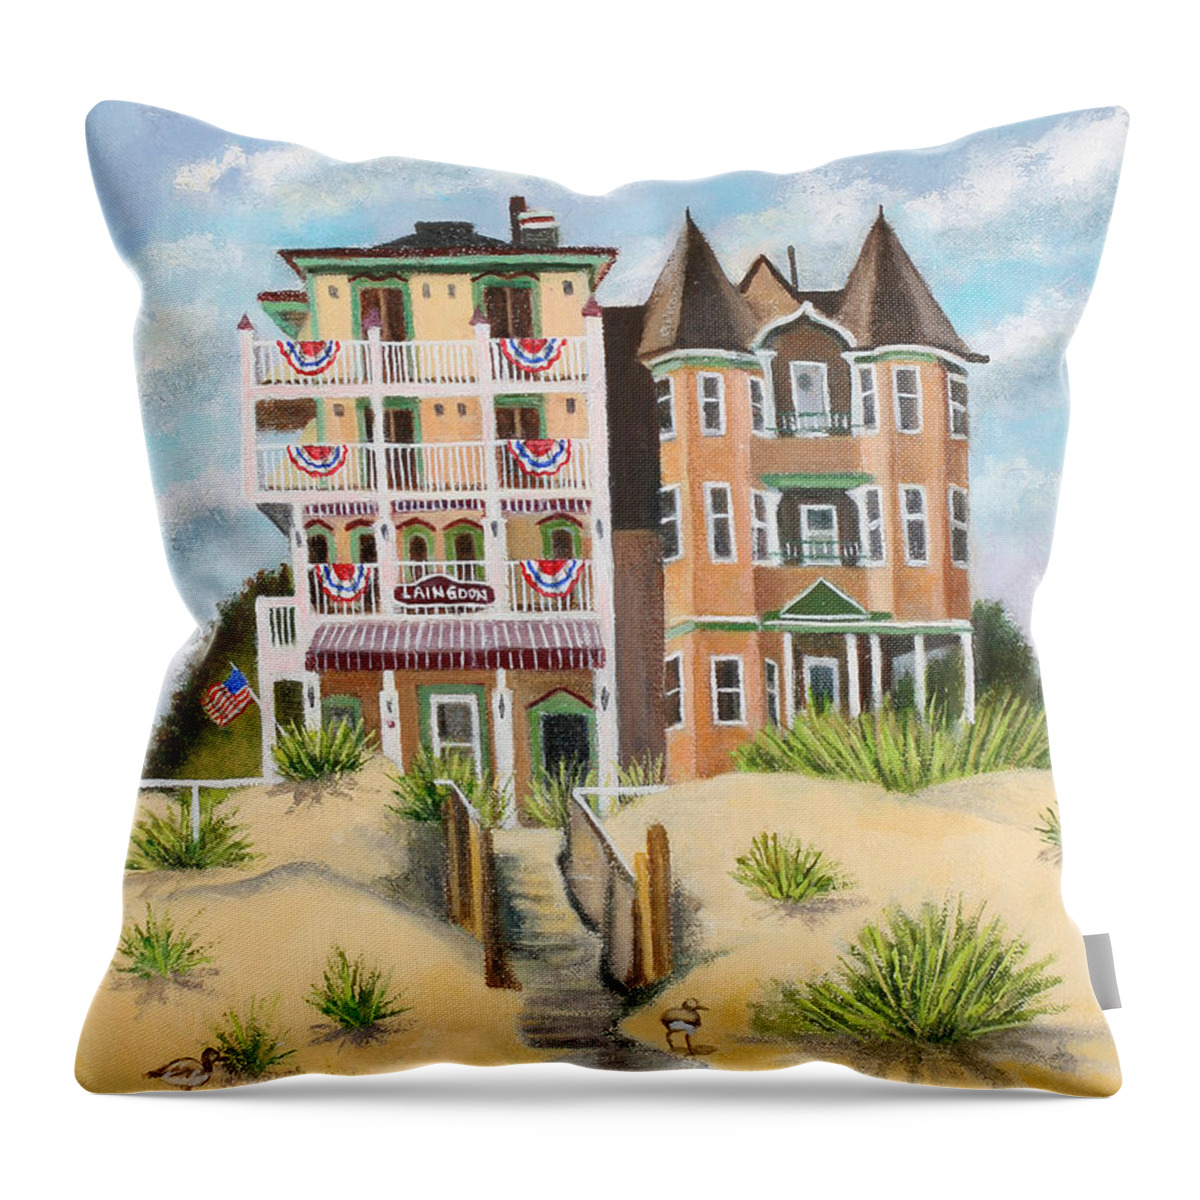 Hotel Throw Pillow featuring the painting The Laington Inn In Ocean Grove. N.J. by Madeline Lovallo